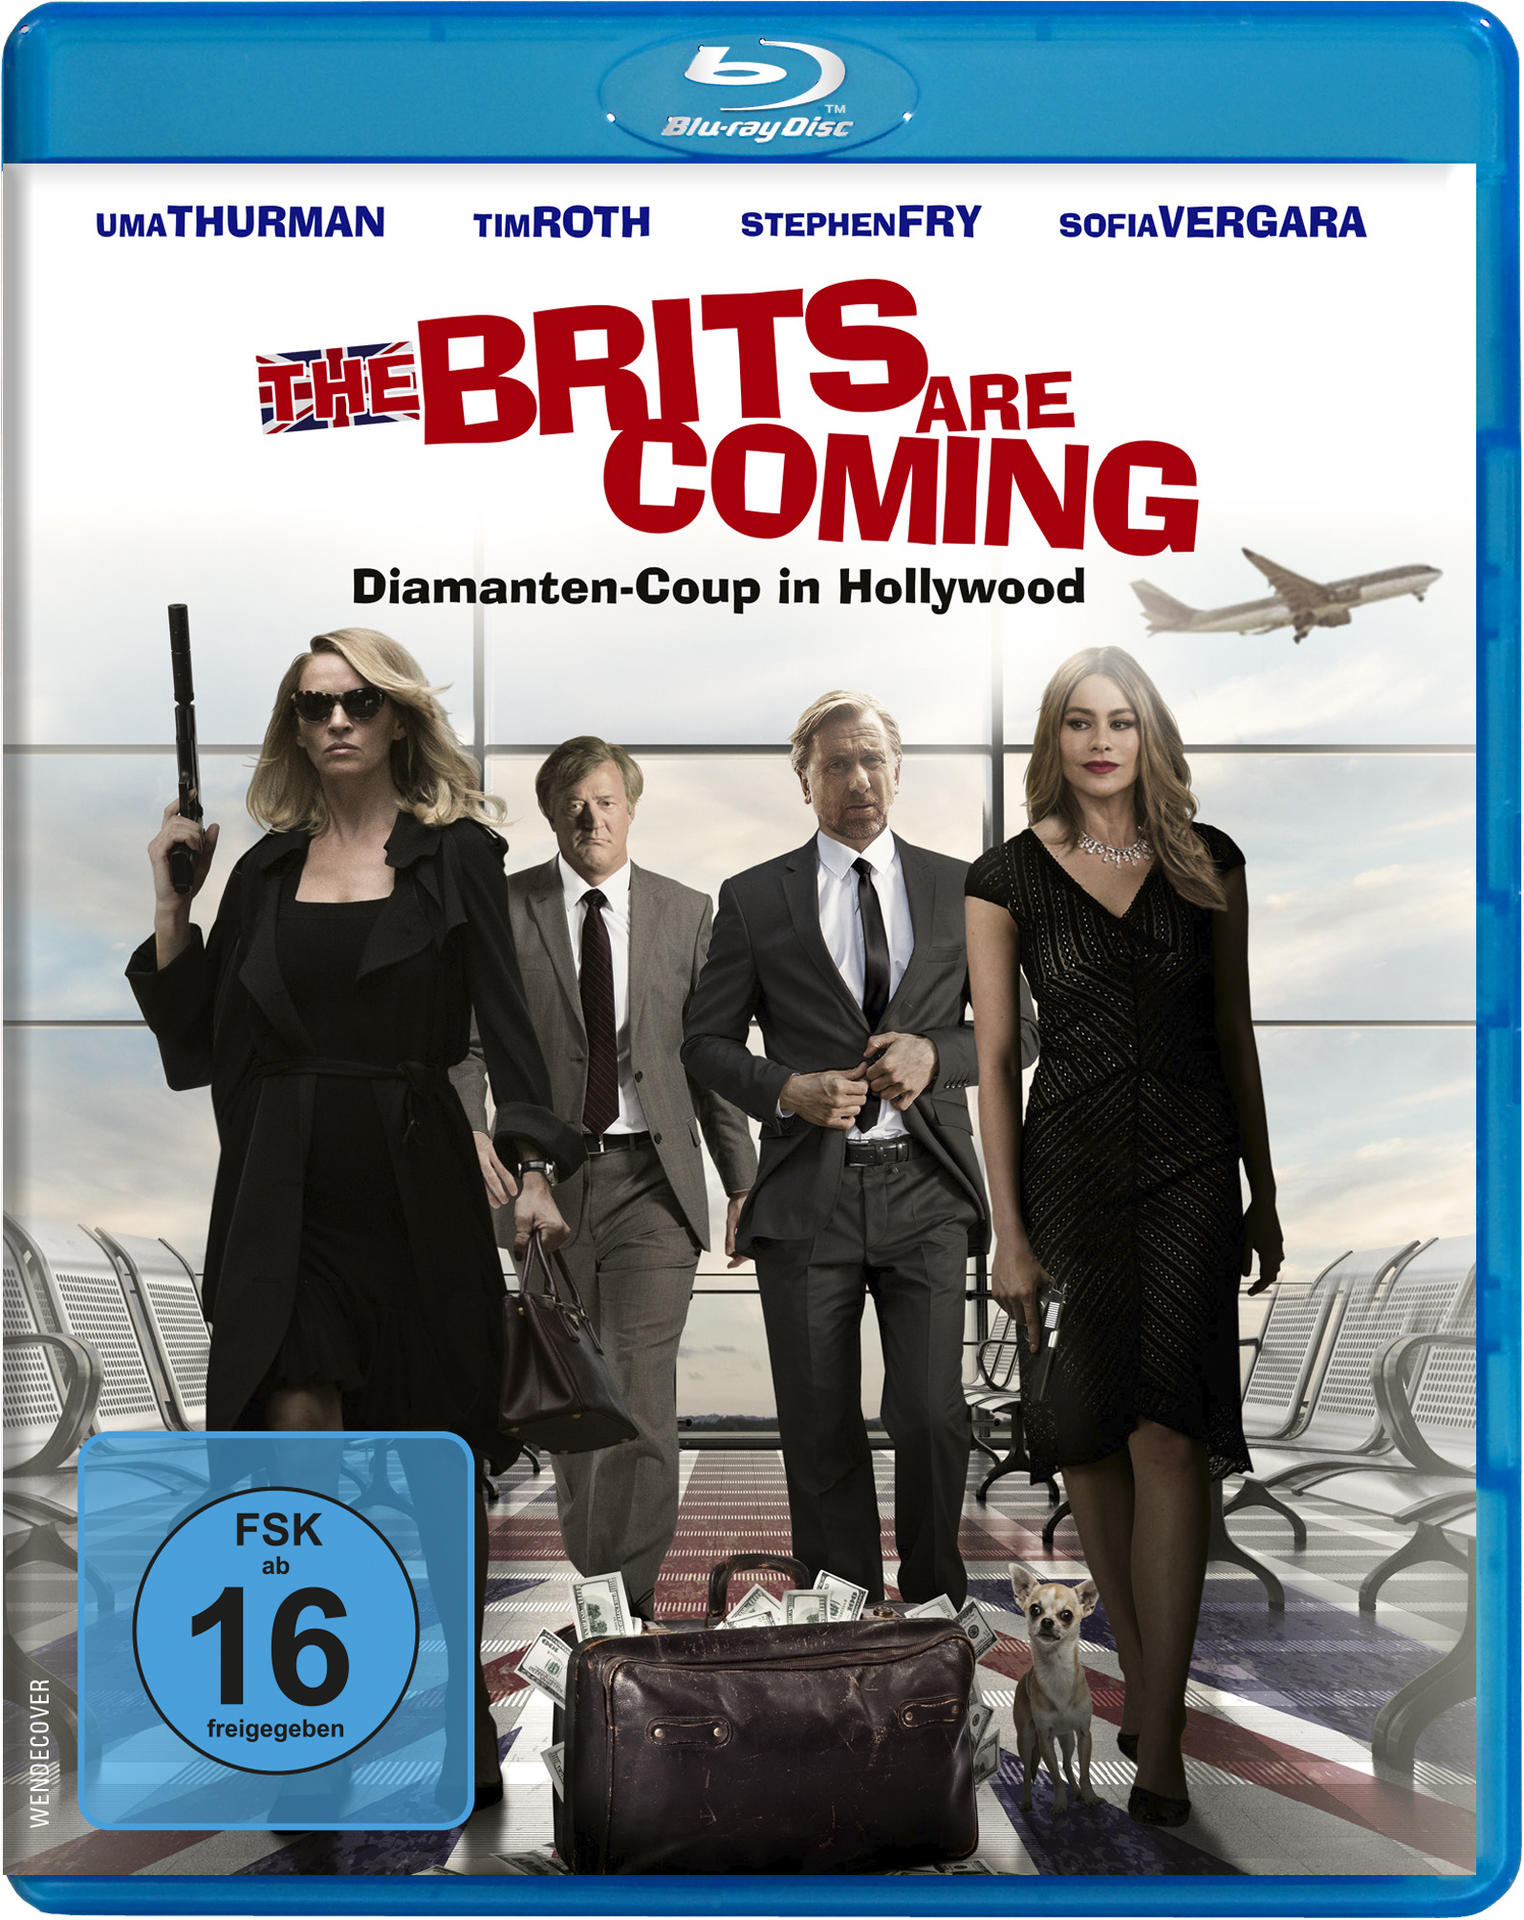 are Blu-ray in Hollywood - Diamanten-Coup The Brits coming